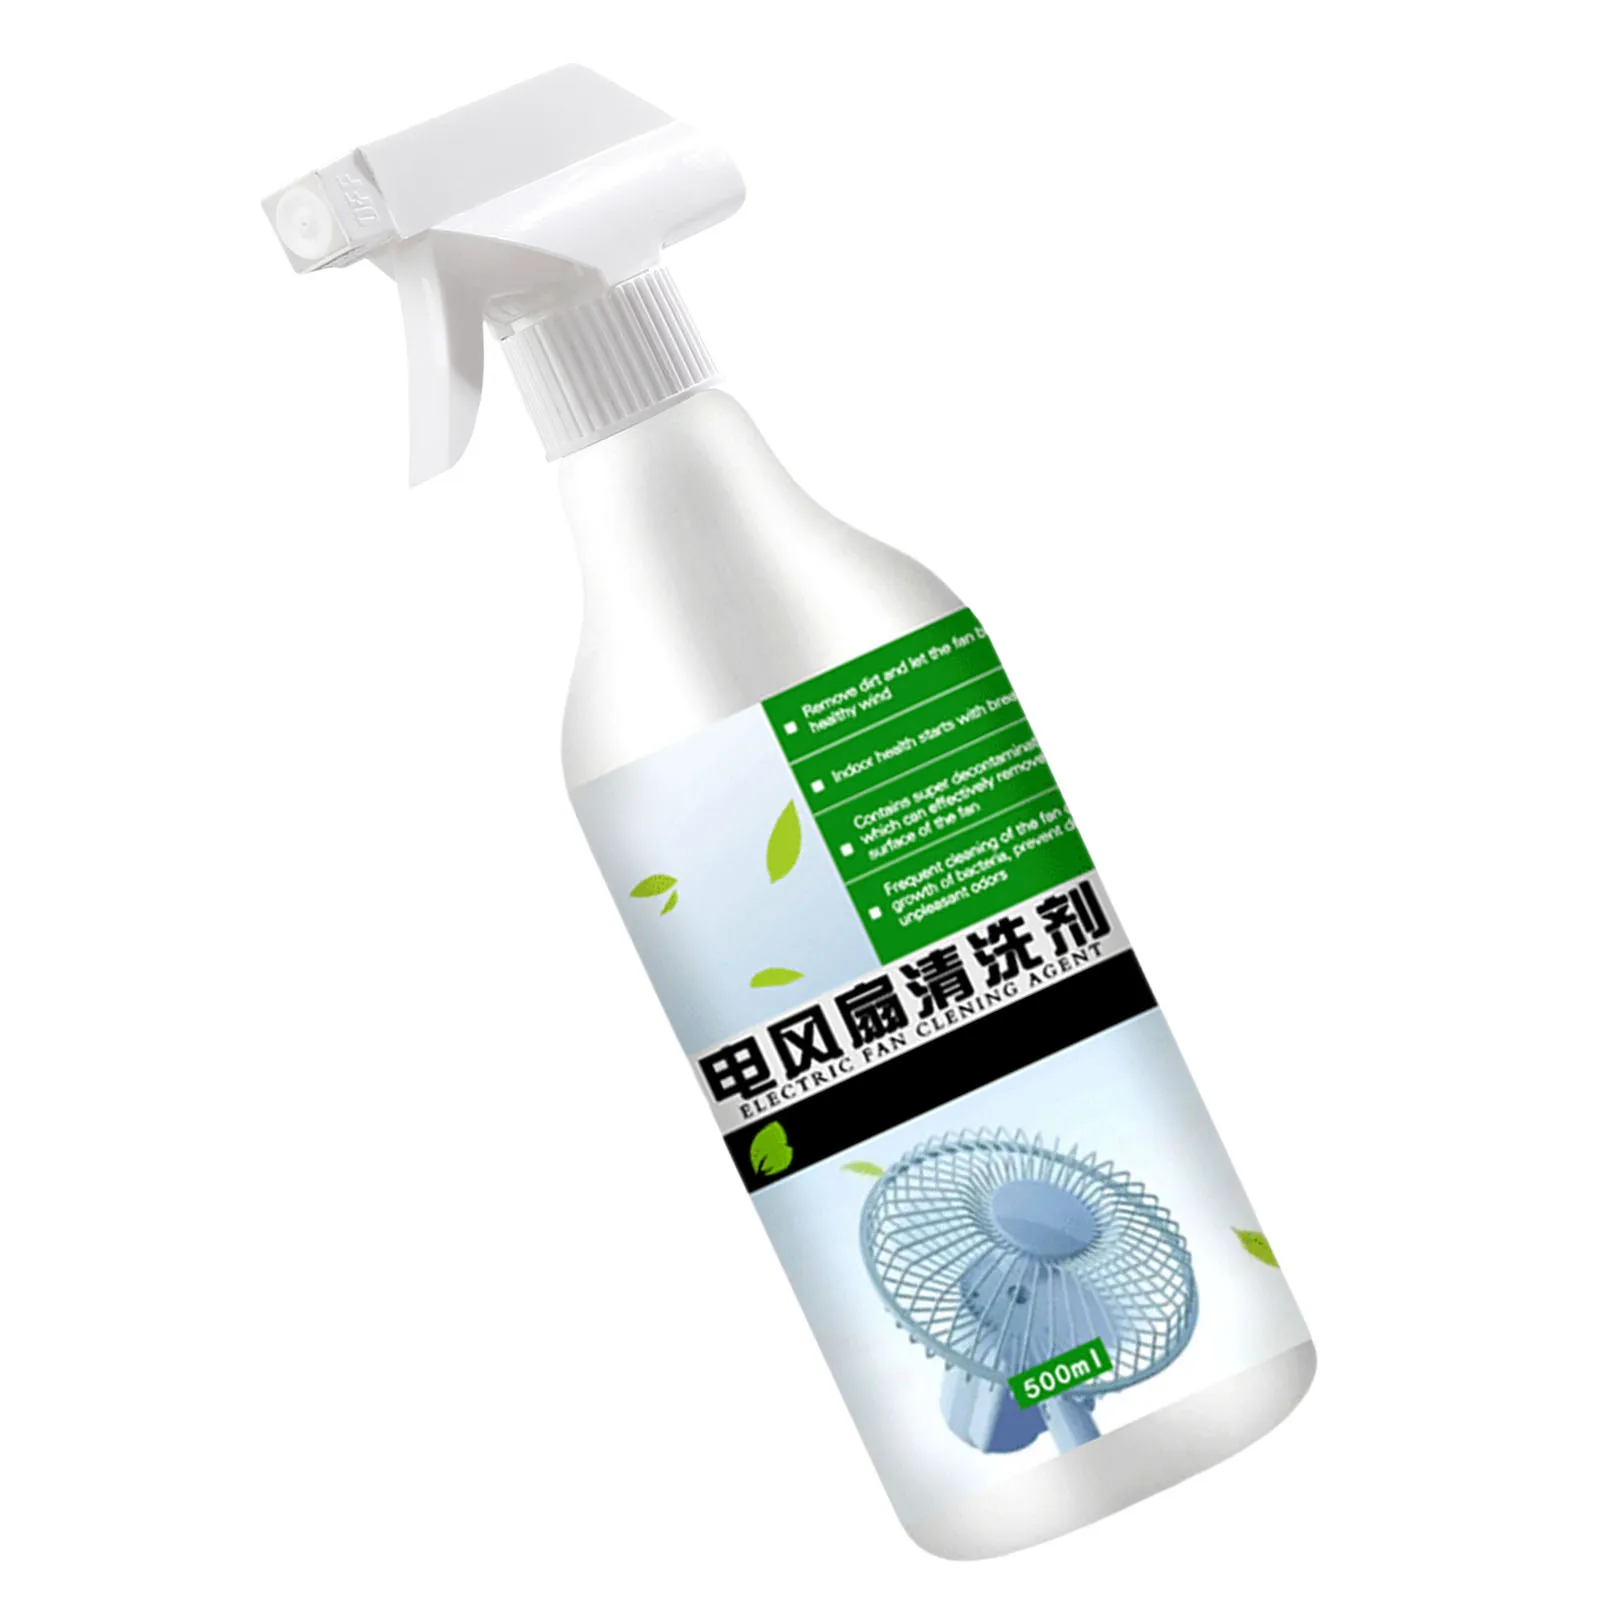 

500ml Electric Fan Cleaning Cleaner Condenser Coil Cleaning Deodorizer for Air Conditioner Heat Sinks Use